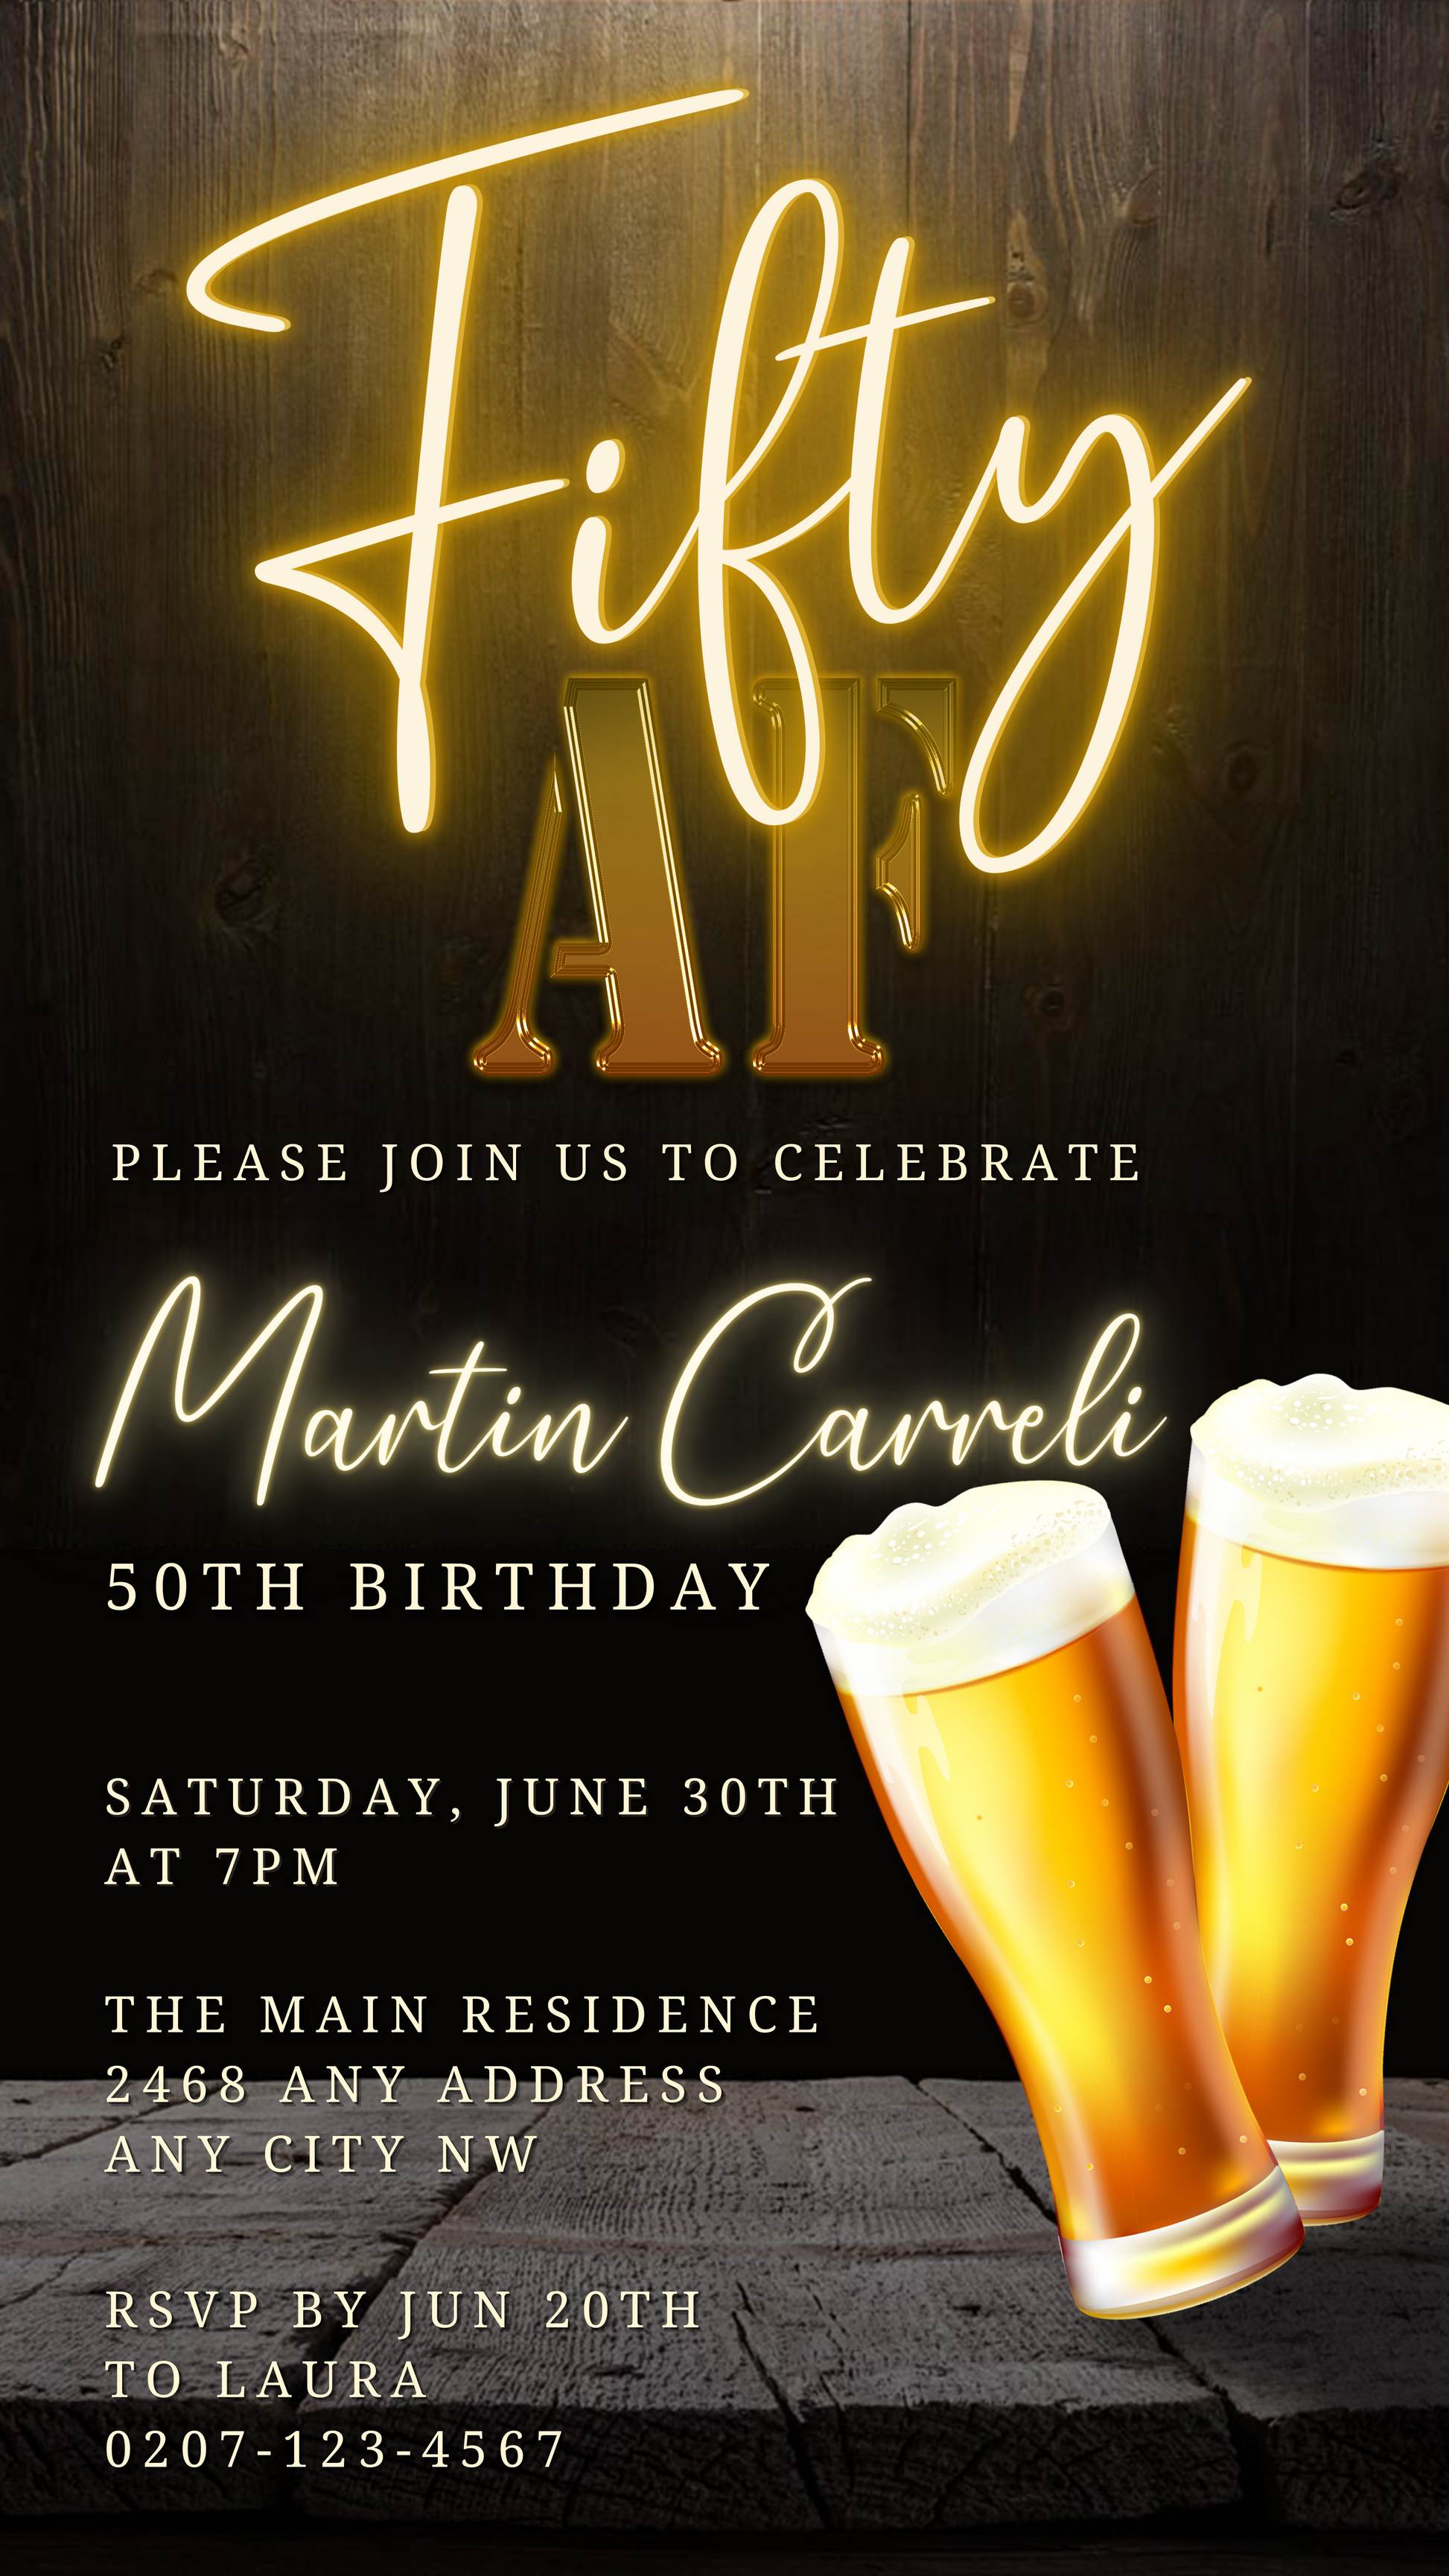 Black Gold Neon Beer | 50AF Birthday Evite with customizable text and beer glasses, perfect for digital invitations via smartphone using Canva.